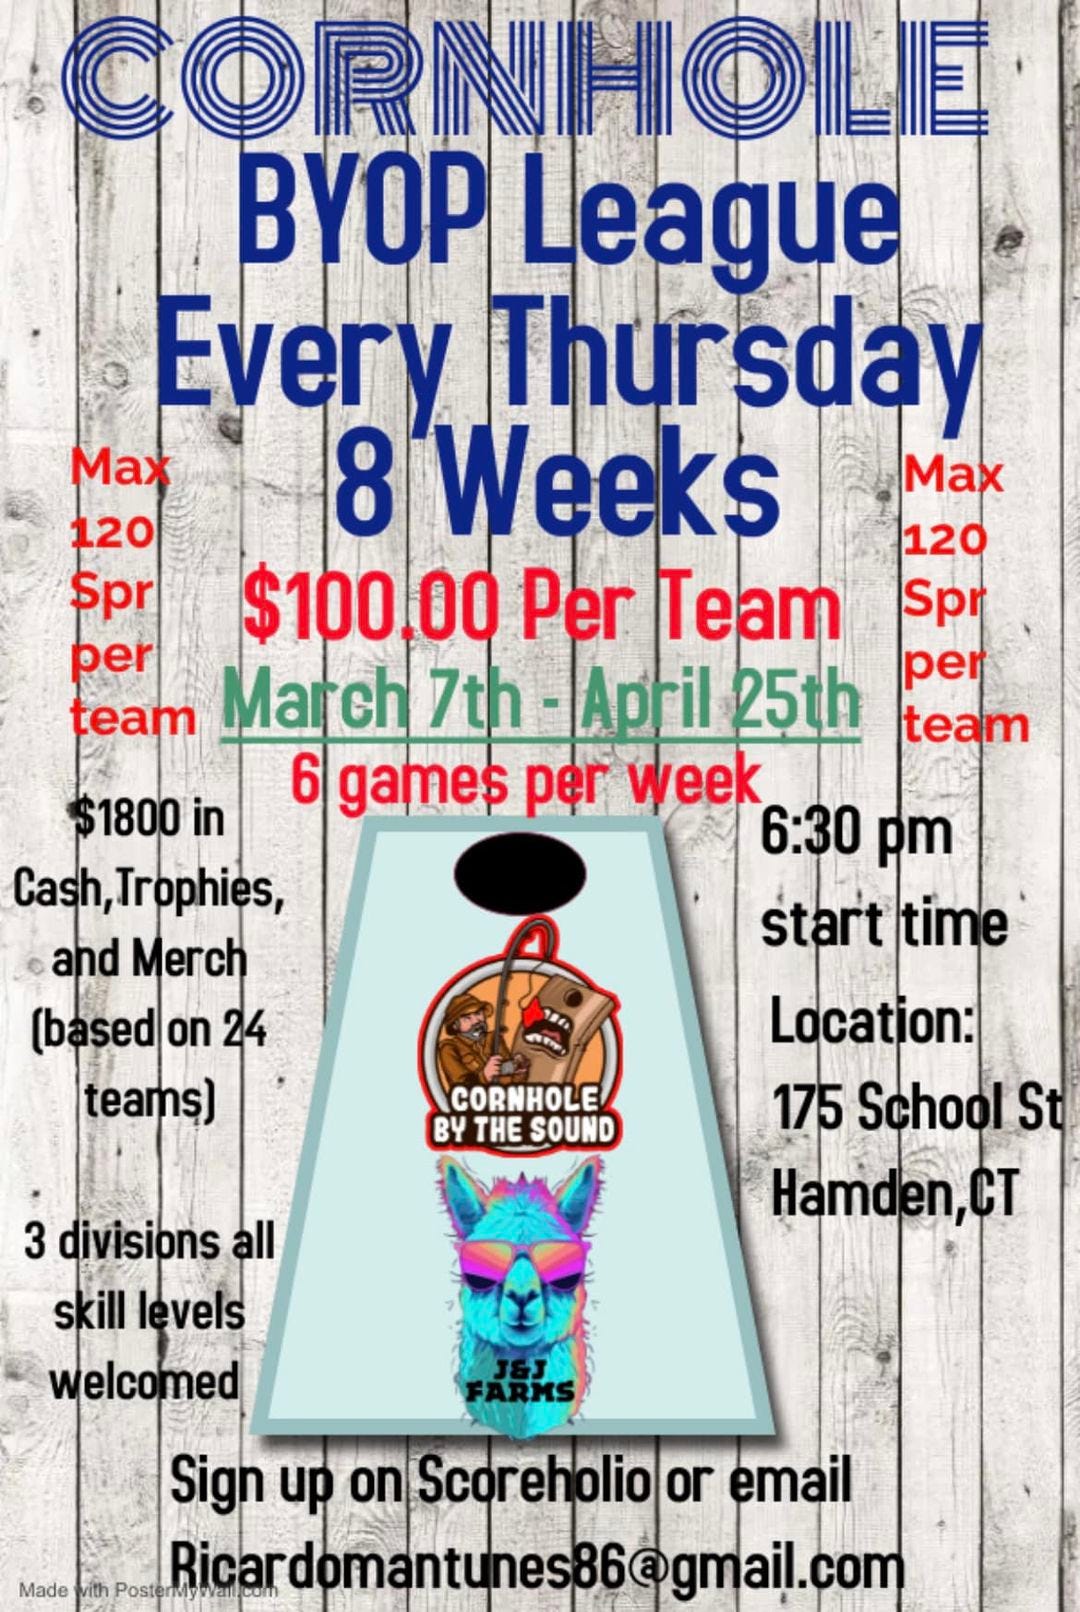 May be an image of basketball and text that says 'BYOP League Every Thursday Thur Max Max 120 8 Weeks 120 Spr $100.00 00 Per Team Spr per per team March 7th -April 25th team 6 games per week 6:30 pm start time Location: 175 School St Hamden,CT $1800 in Cash, Trophies, and Merch (based on 24 teams) CORNHOLE BY THE SOUND 3 divisions all skill levels welcomed Sign up Scoreholioor email Ricardomantunes86@gmail.com Ricardomantunes86'